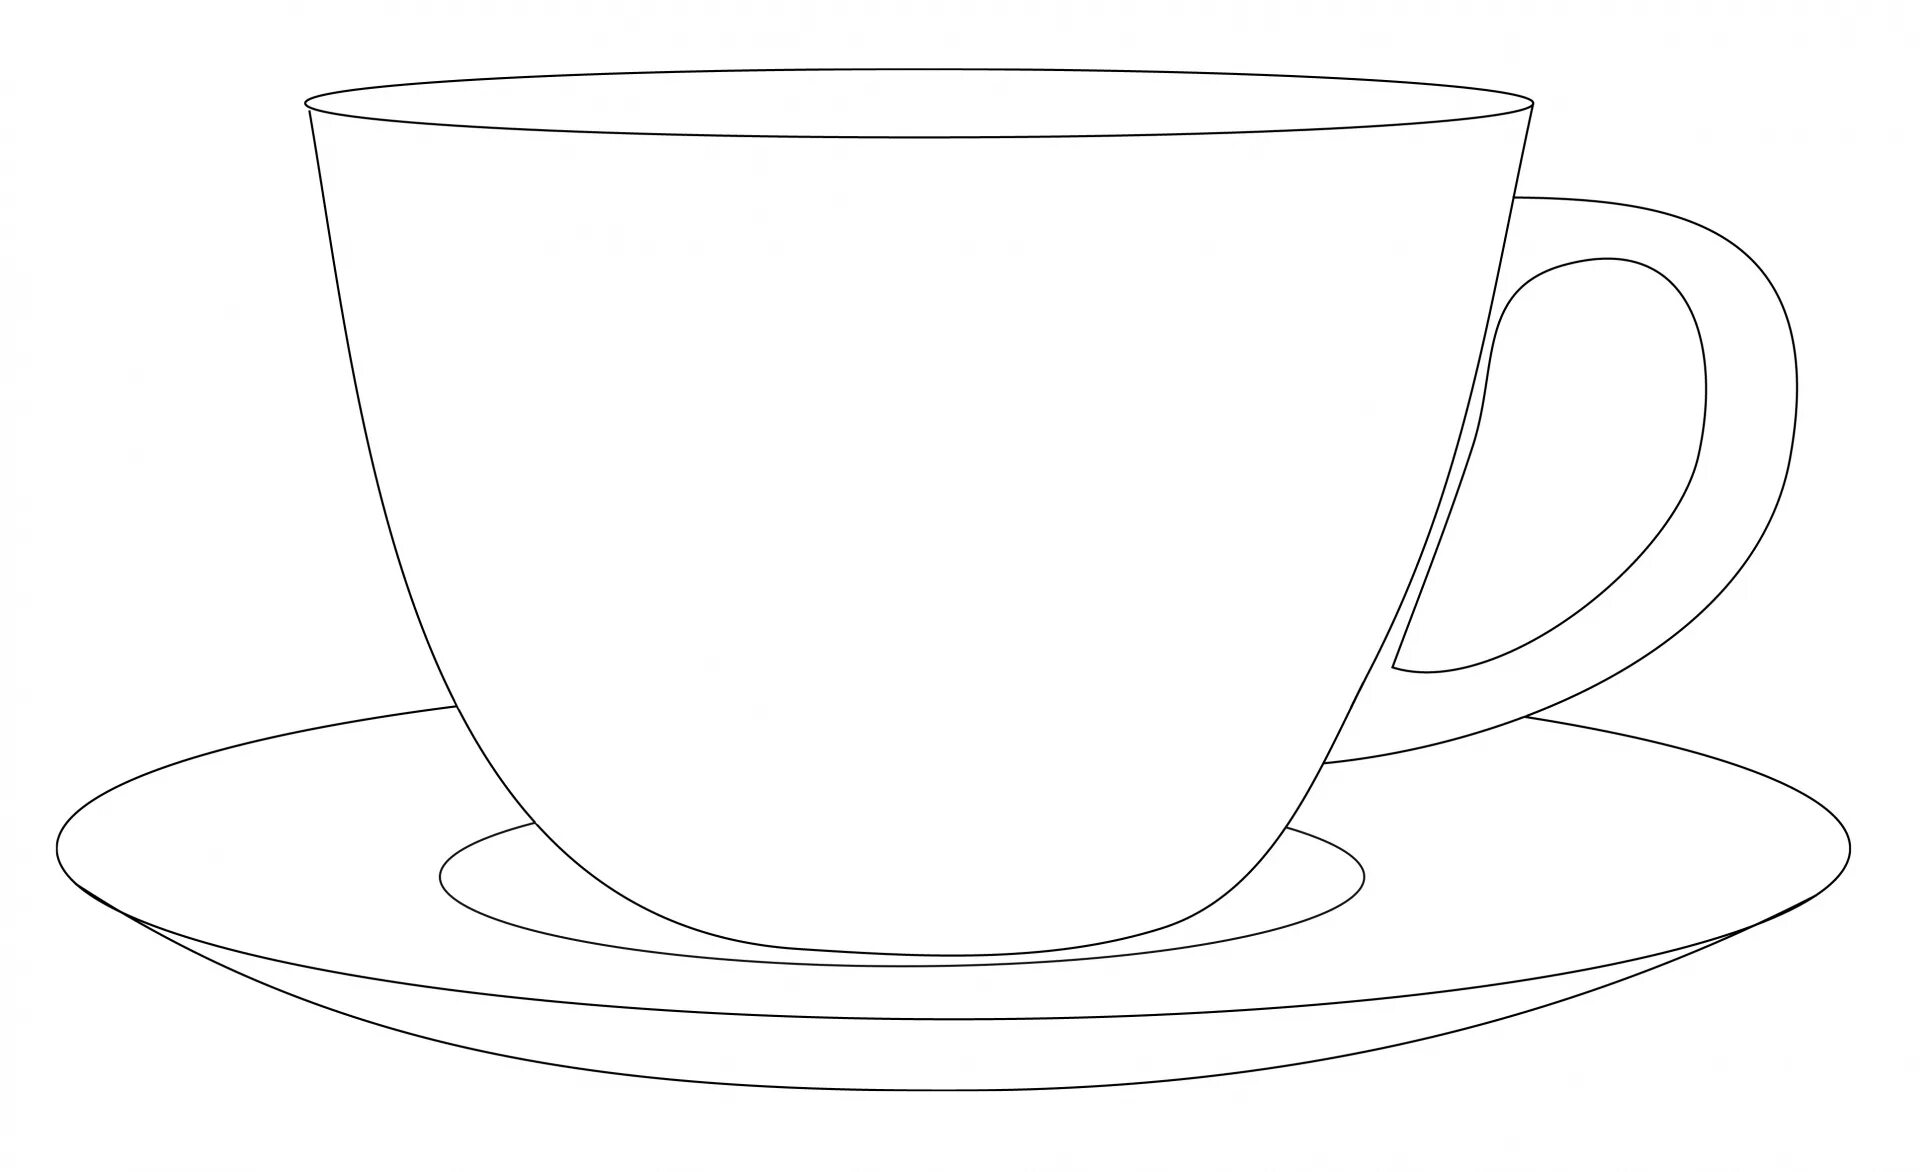 Coloring page of sparkling mugs for kids